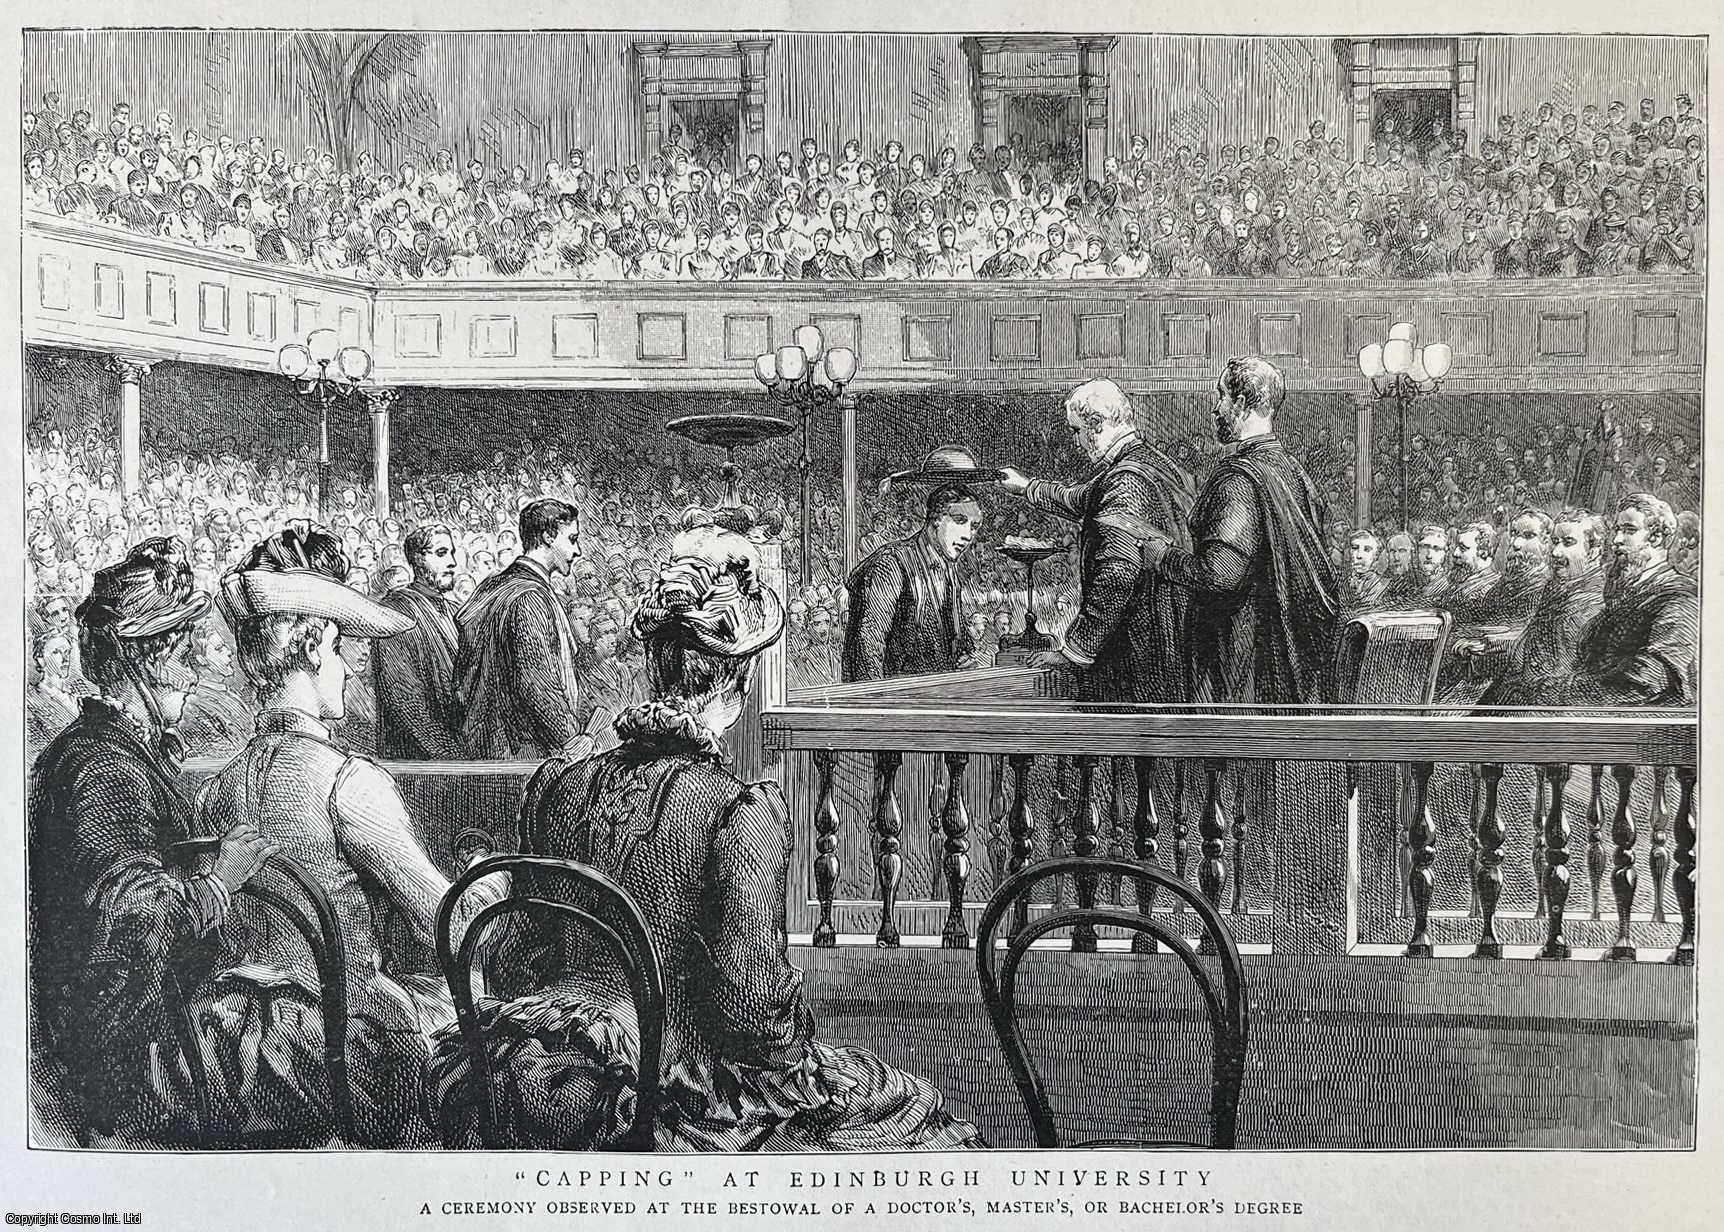 EDINBURGH UNIVERSITY - Edinburgh University - 'Capping'. A ceremony observed at the bestowal of a Doctor's, Master's or Bachelor's Degree. An original woodcut engraving, from the Graphic Illustrated Weekly Magazine, 1889.